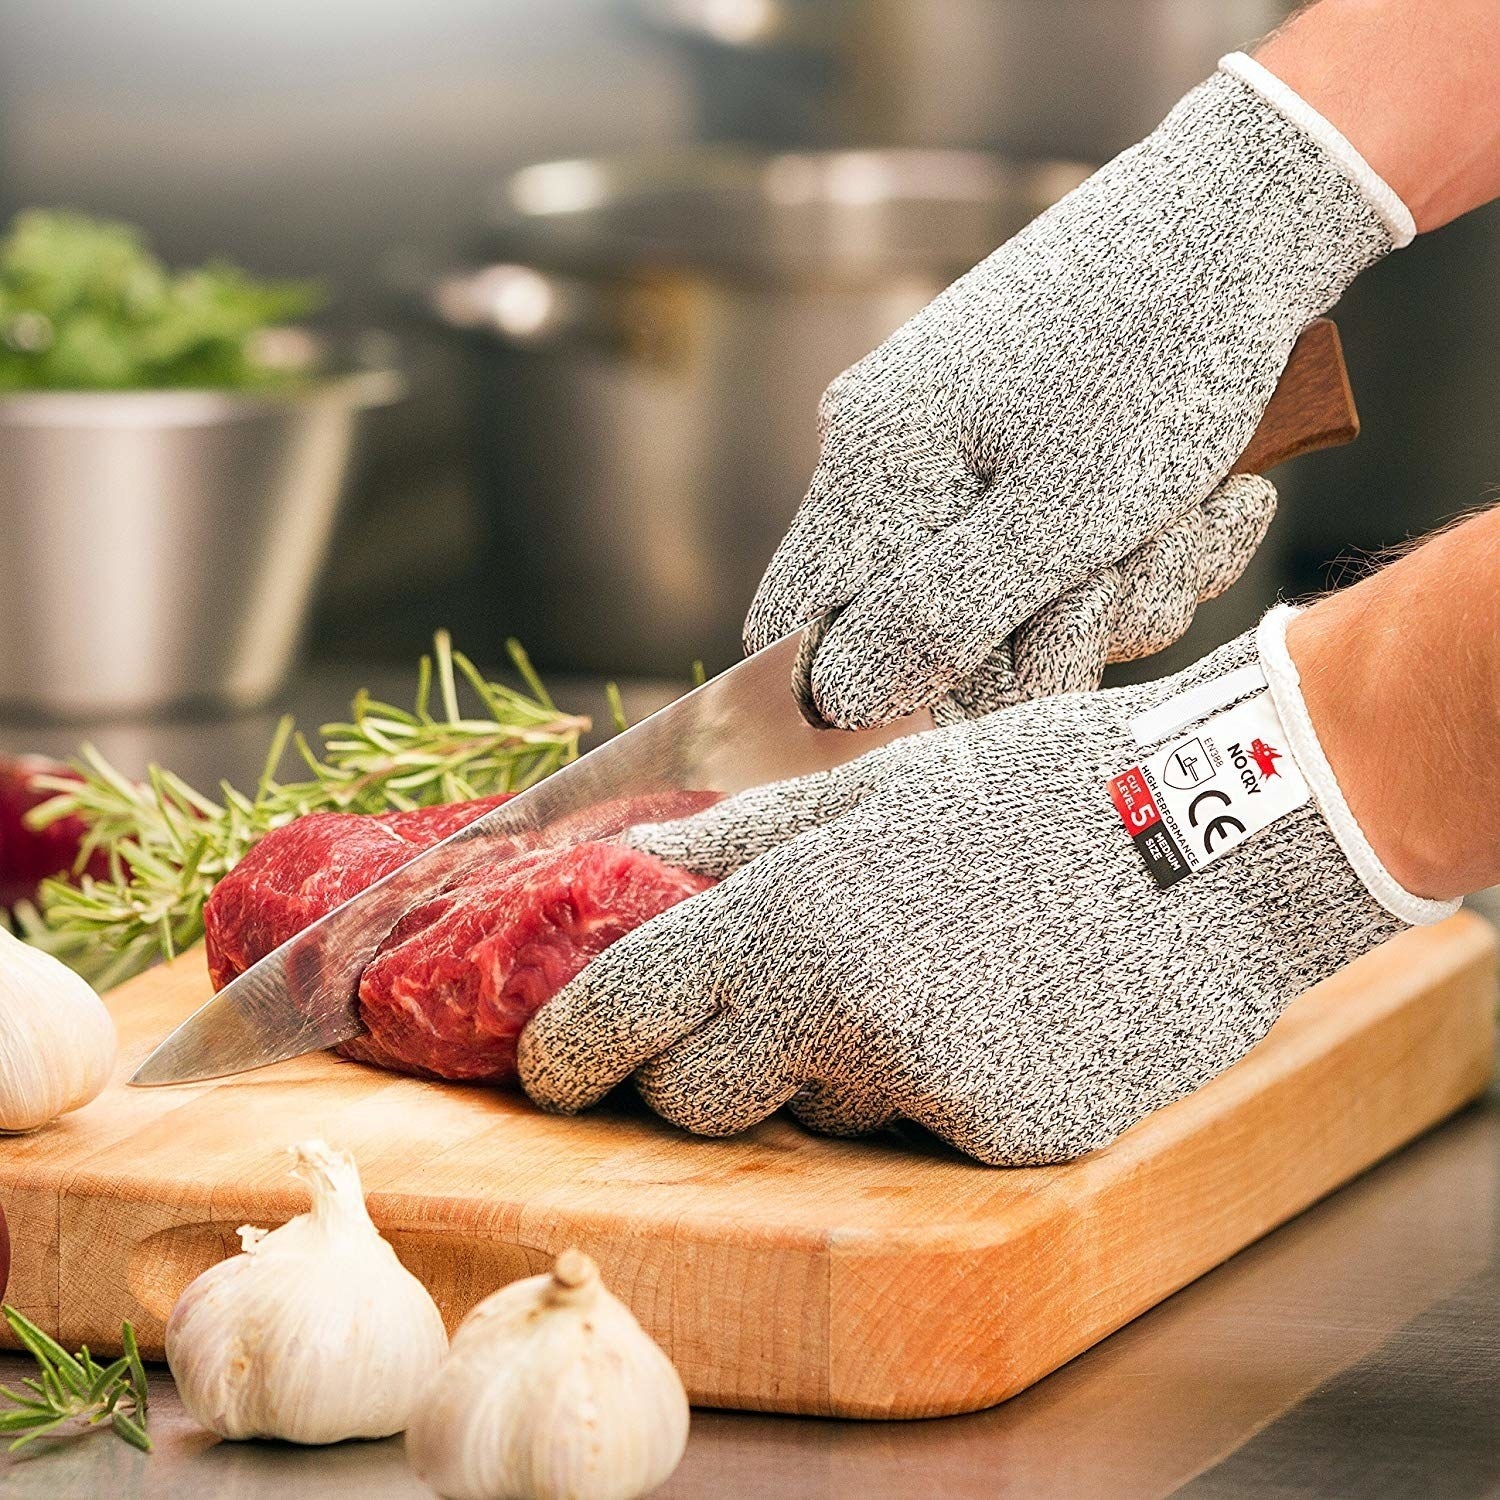 a model using the thick grey gloves to cut a steak